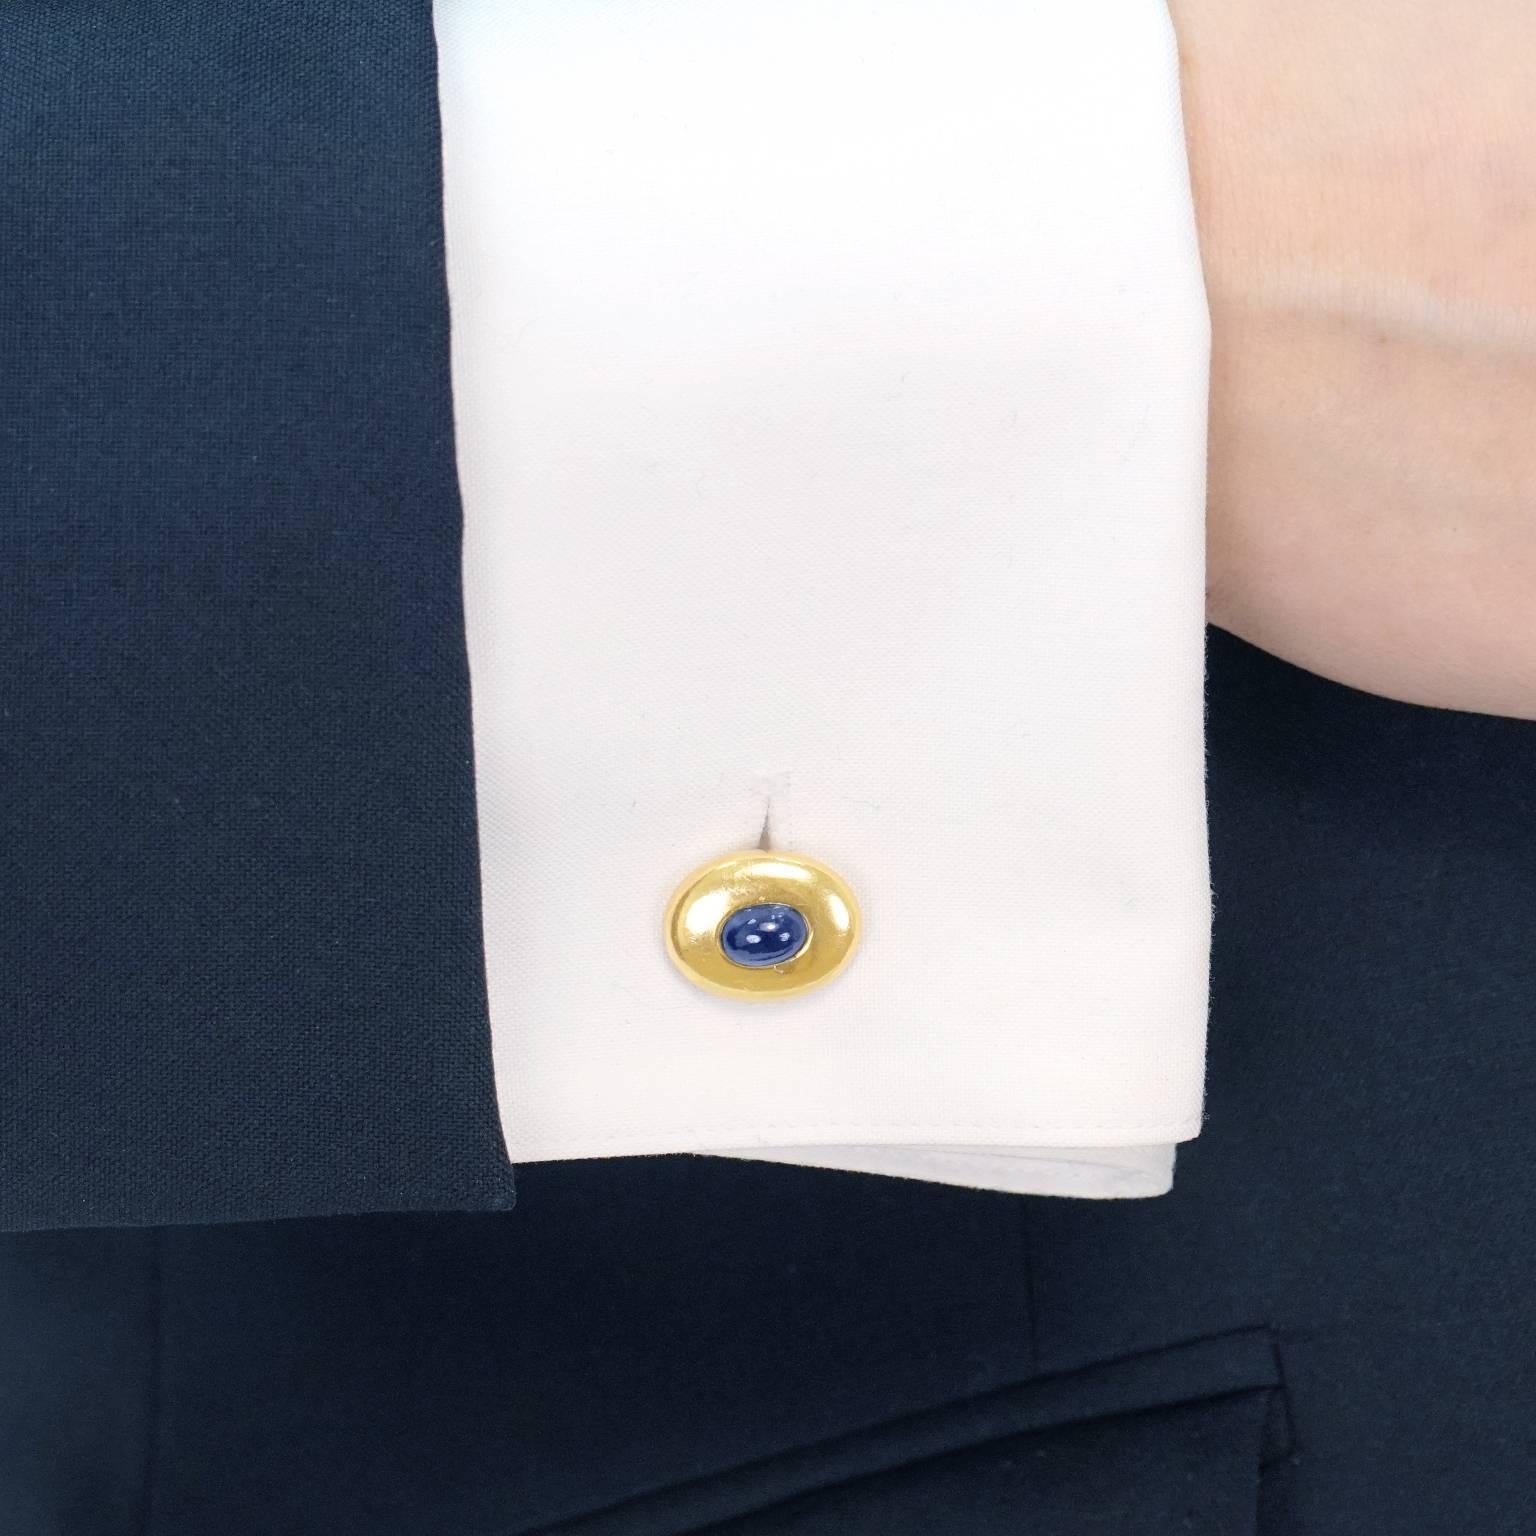 Circa 1950s, 18k, Swiss.   These smart 18k yellow gold cuff links are the perfect, go-to links. Classic and modern in the same sweep of the eye, each is set with a vibrant blue cabochon sapphire. Exquisitely made, they are easy to put in, and hold